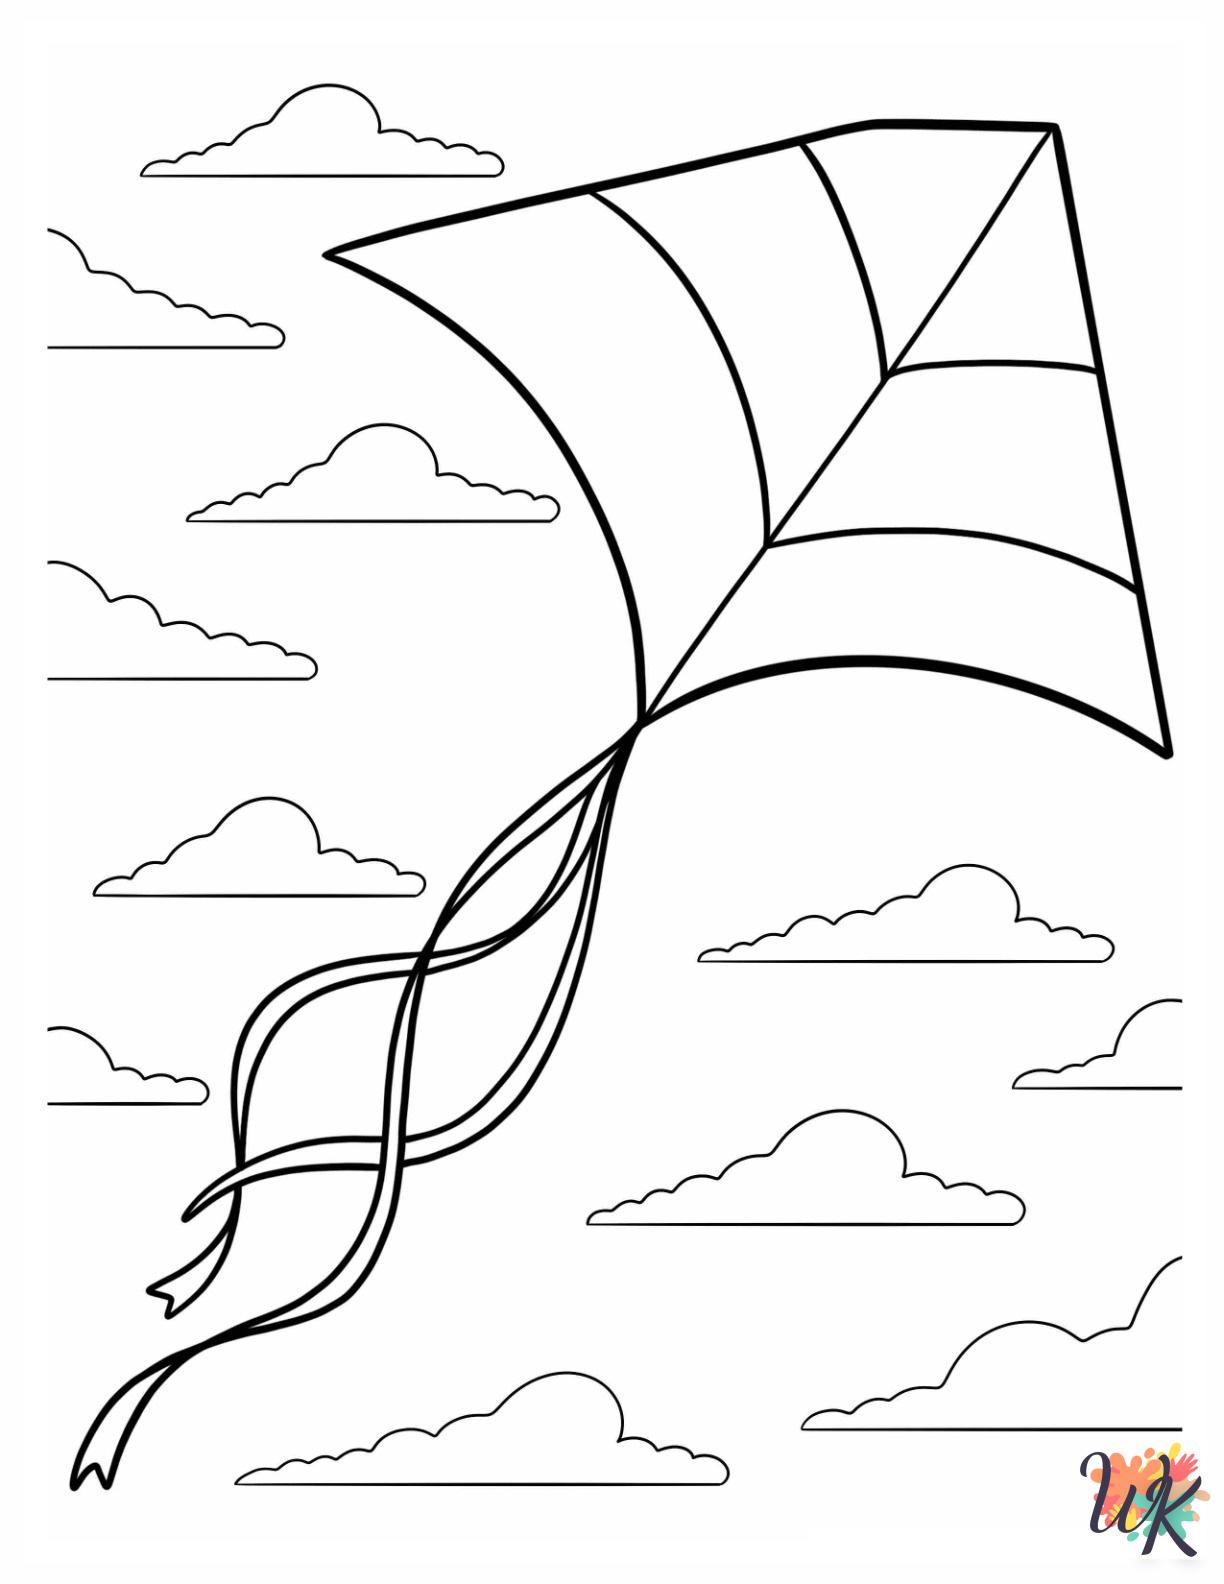 Kite coloring pages to print